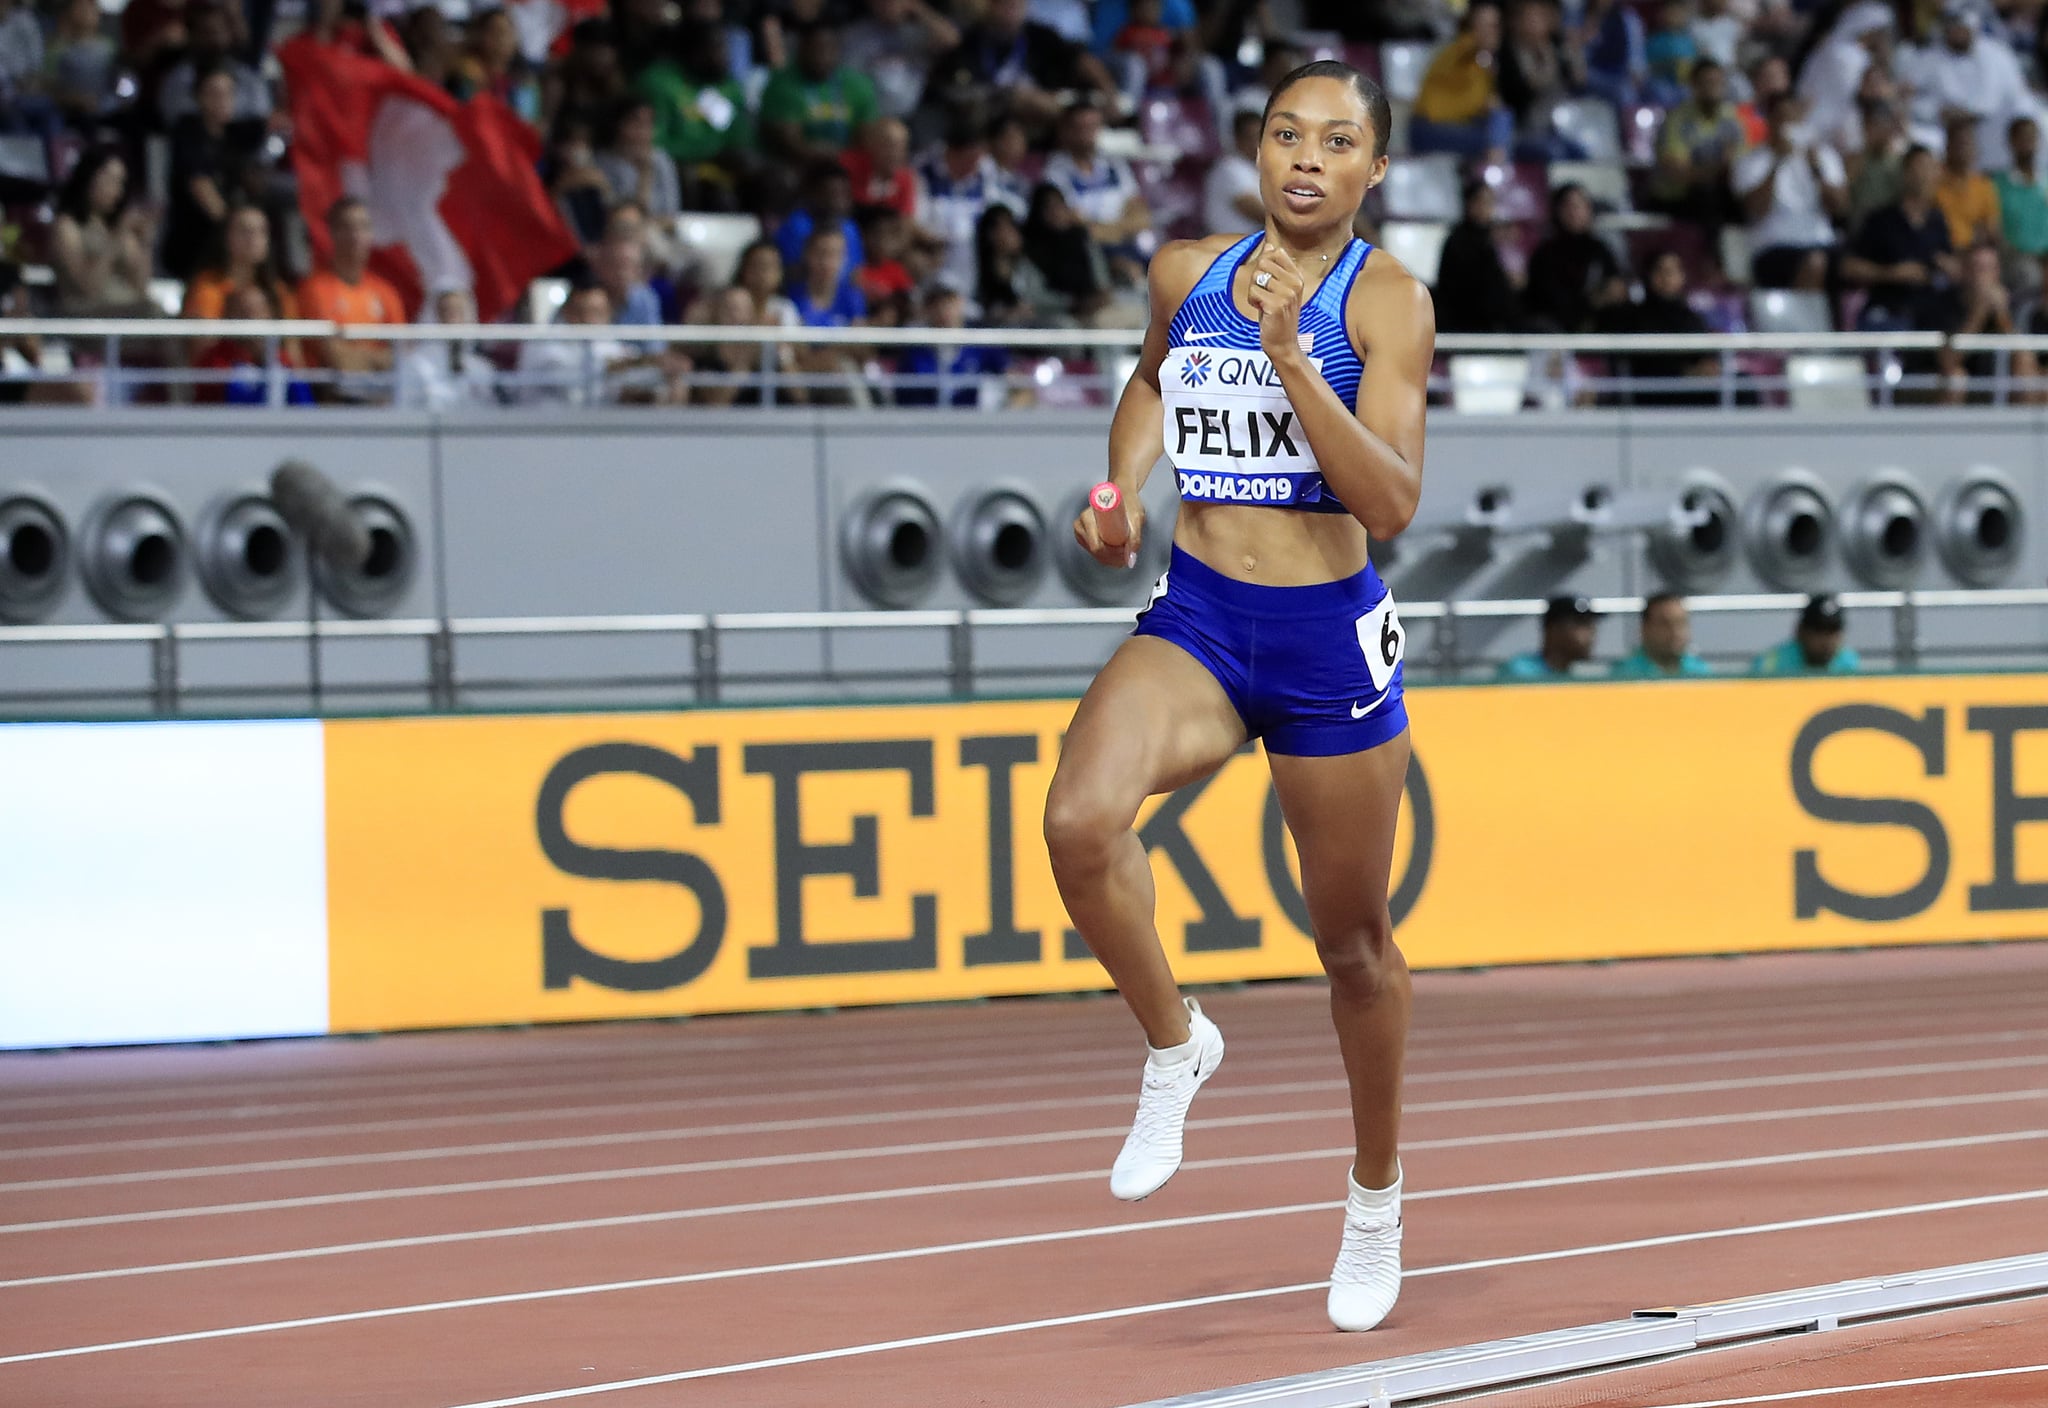 DOHA, QATAR - OCTOBER 05:  Allyson Felix of the United States competes in the Women's 4x400 metres relay heats during day nine of 17th IAAF World Athletics Championships Doha 2019 at Khalifa International Stadium on October 05, 2019 in Doha, Qatar. (Photo by Andy Lyons/Getty Images for IAAF)